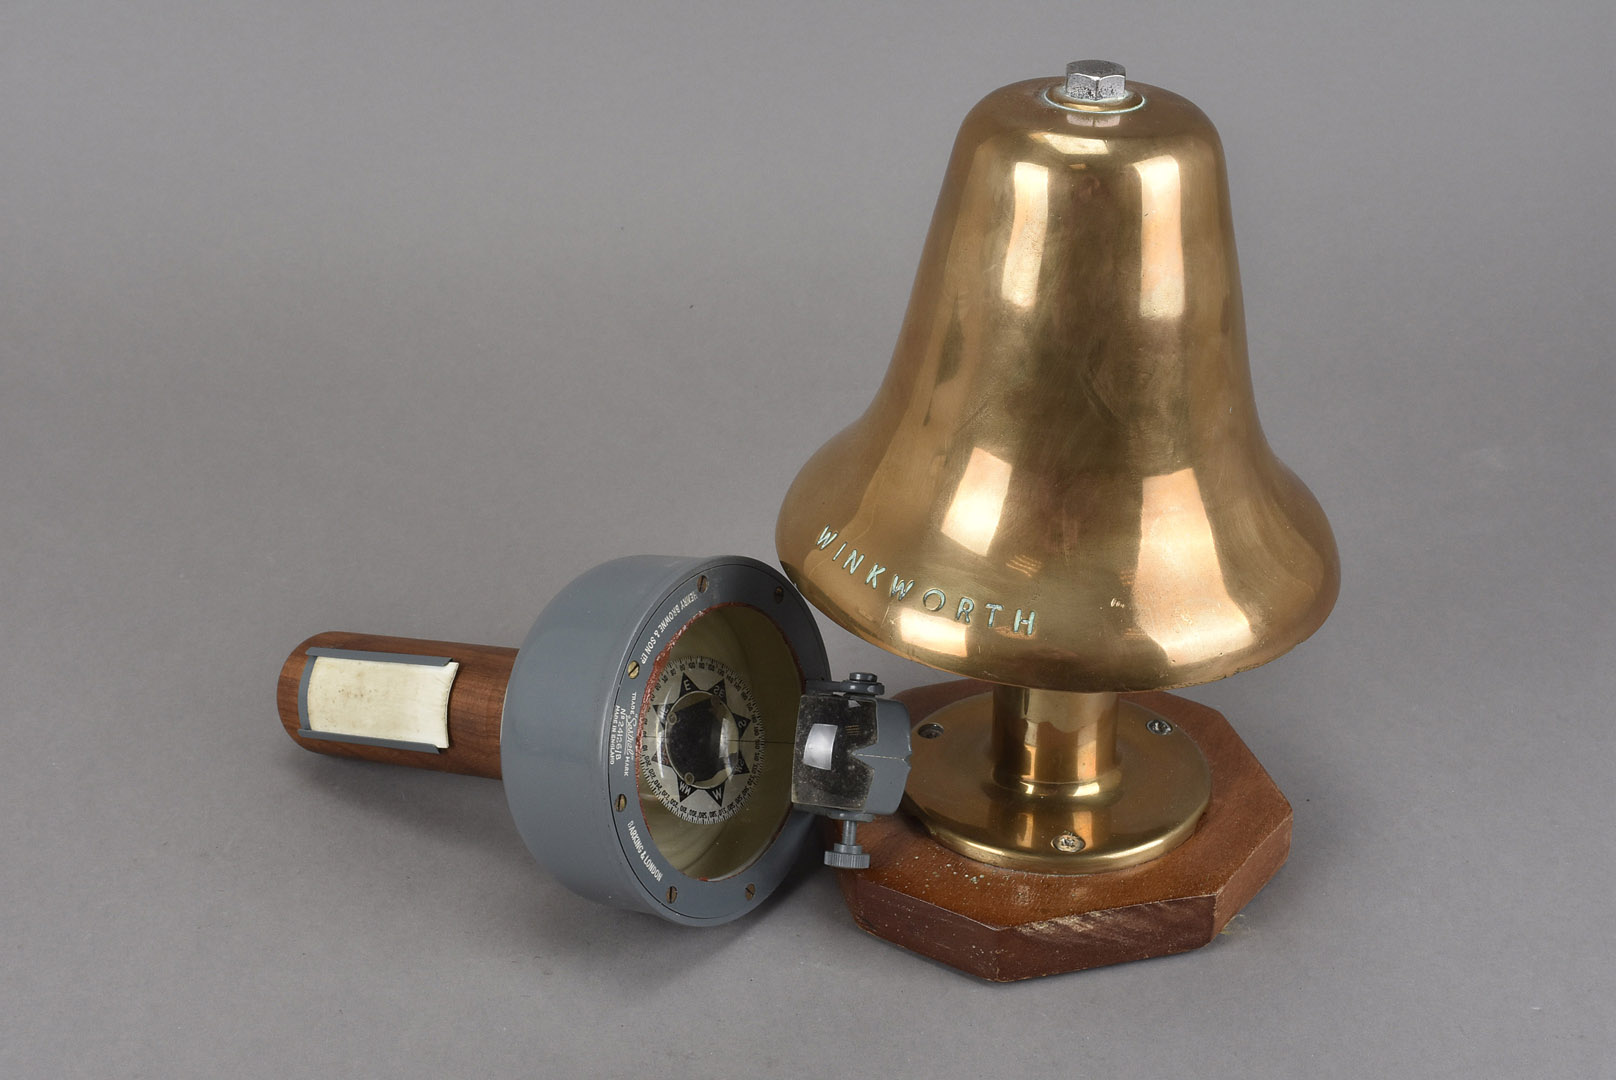 A Winkworth bell, having electrical movement, together with a Henry Browne & Son Ltd hand held